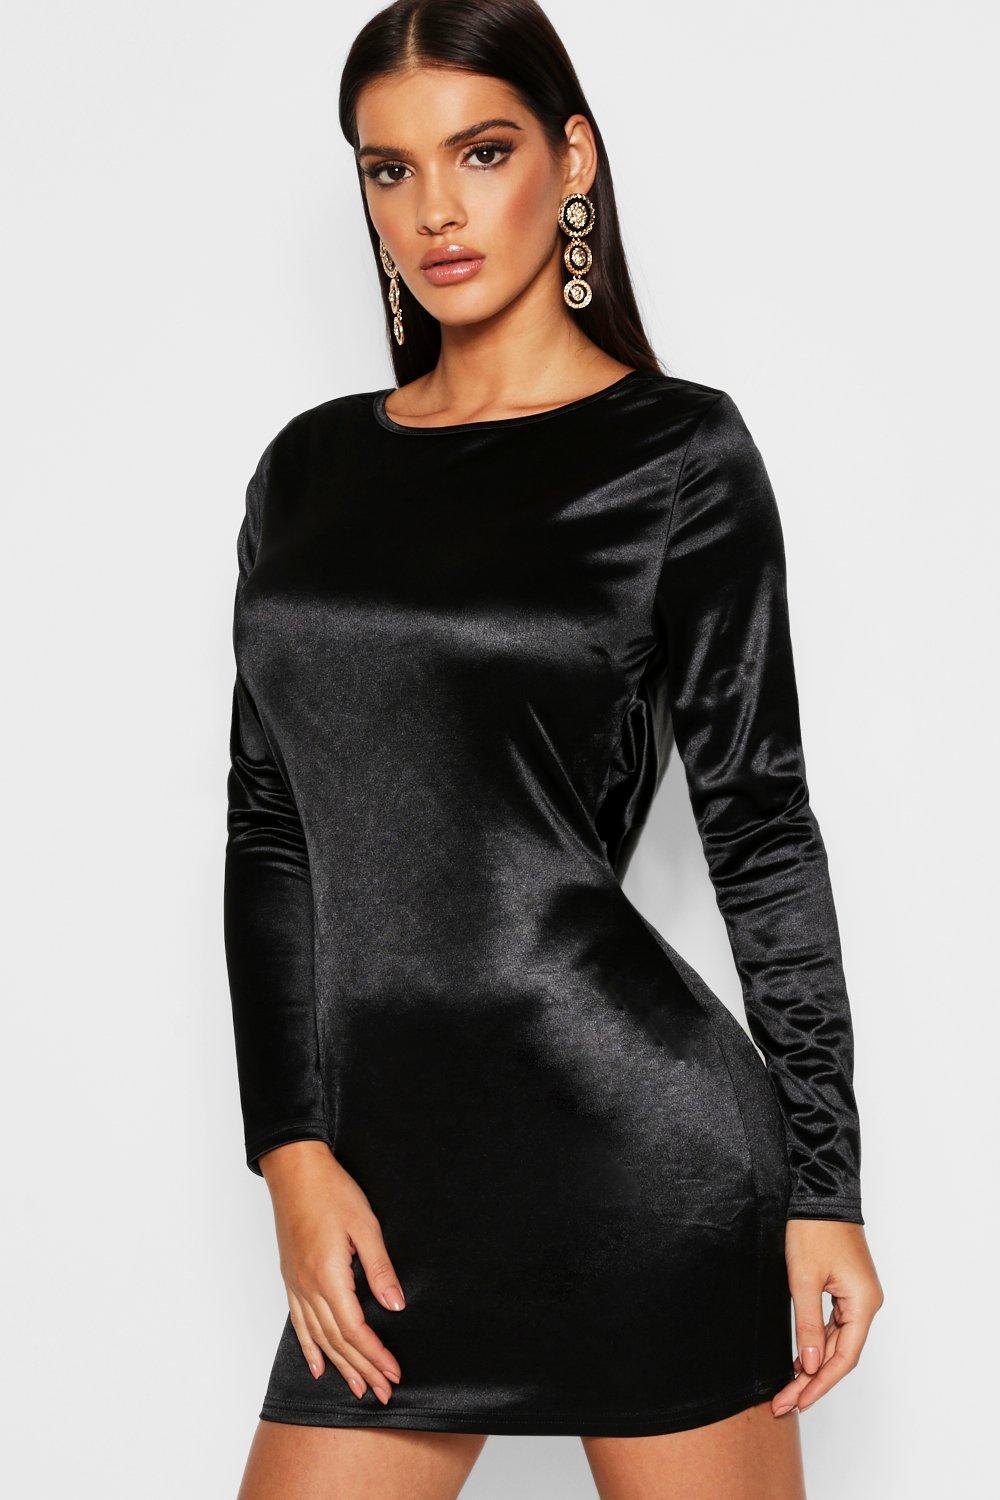 Satin Bodycon Dress Long Sleeve Outlet, SAVE 34% - www.aktivibergenvest.no